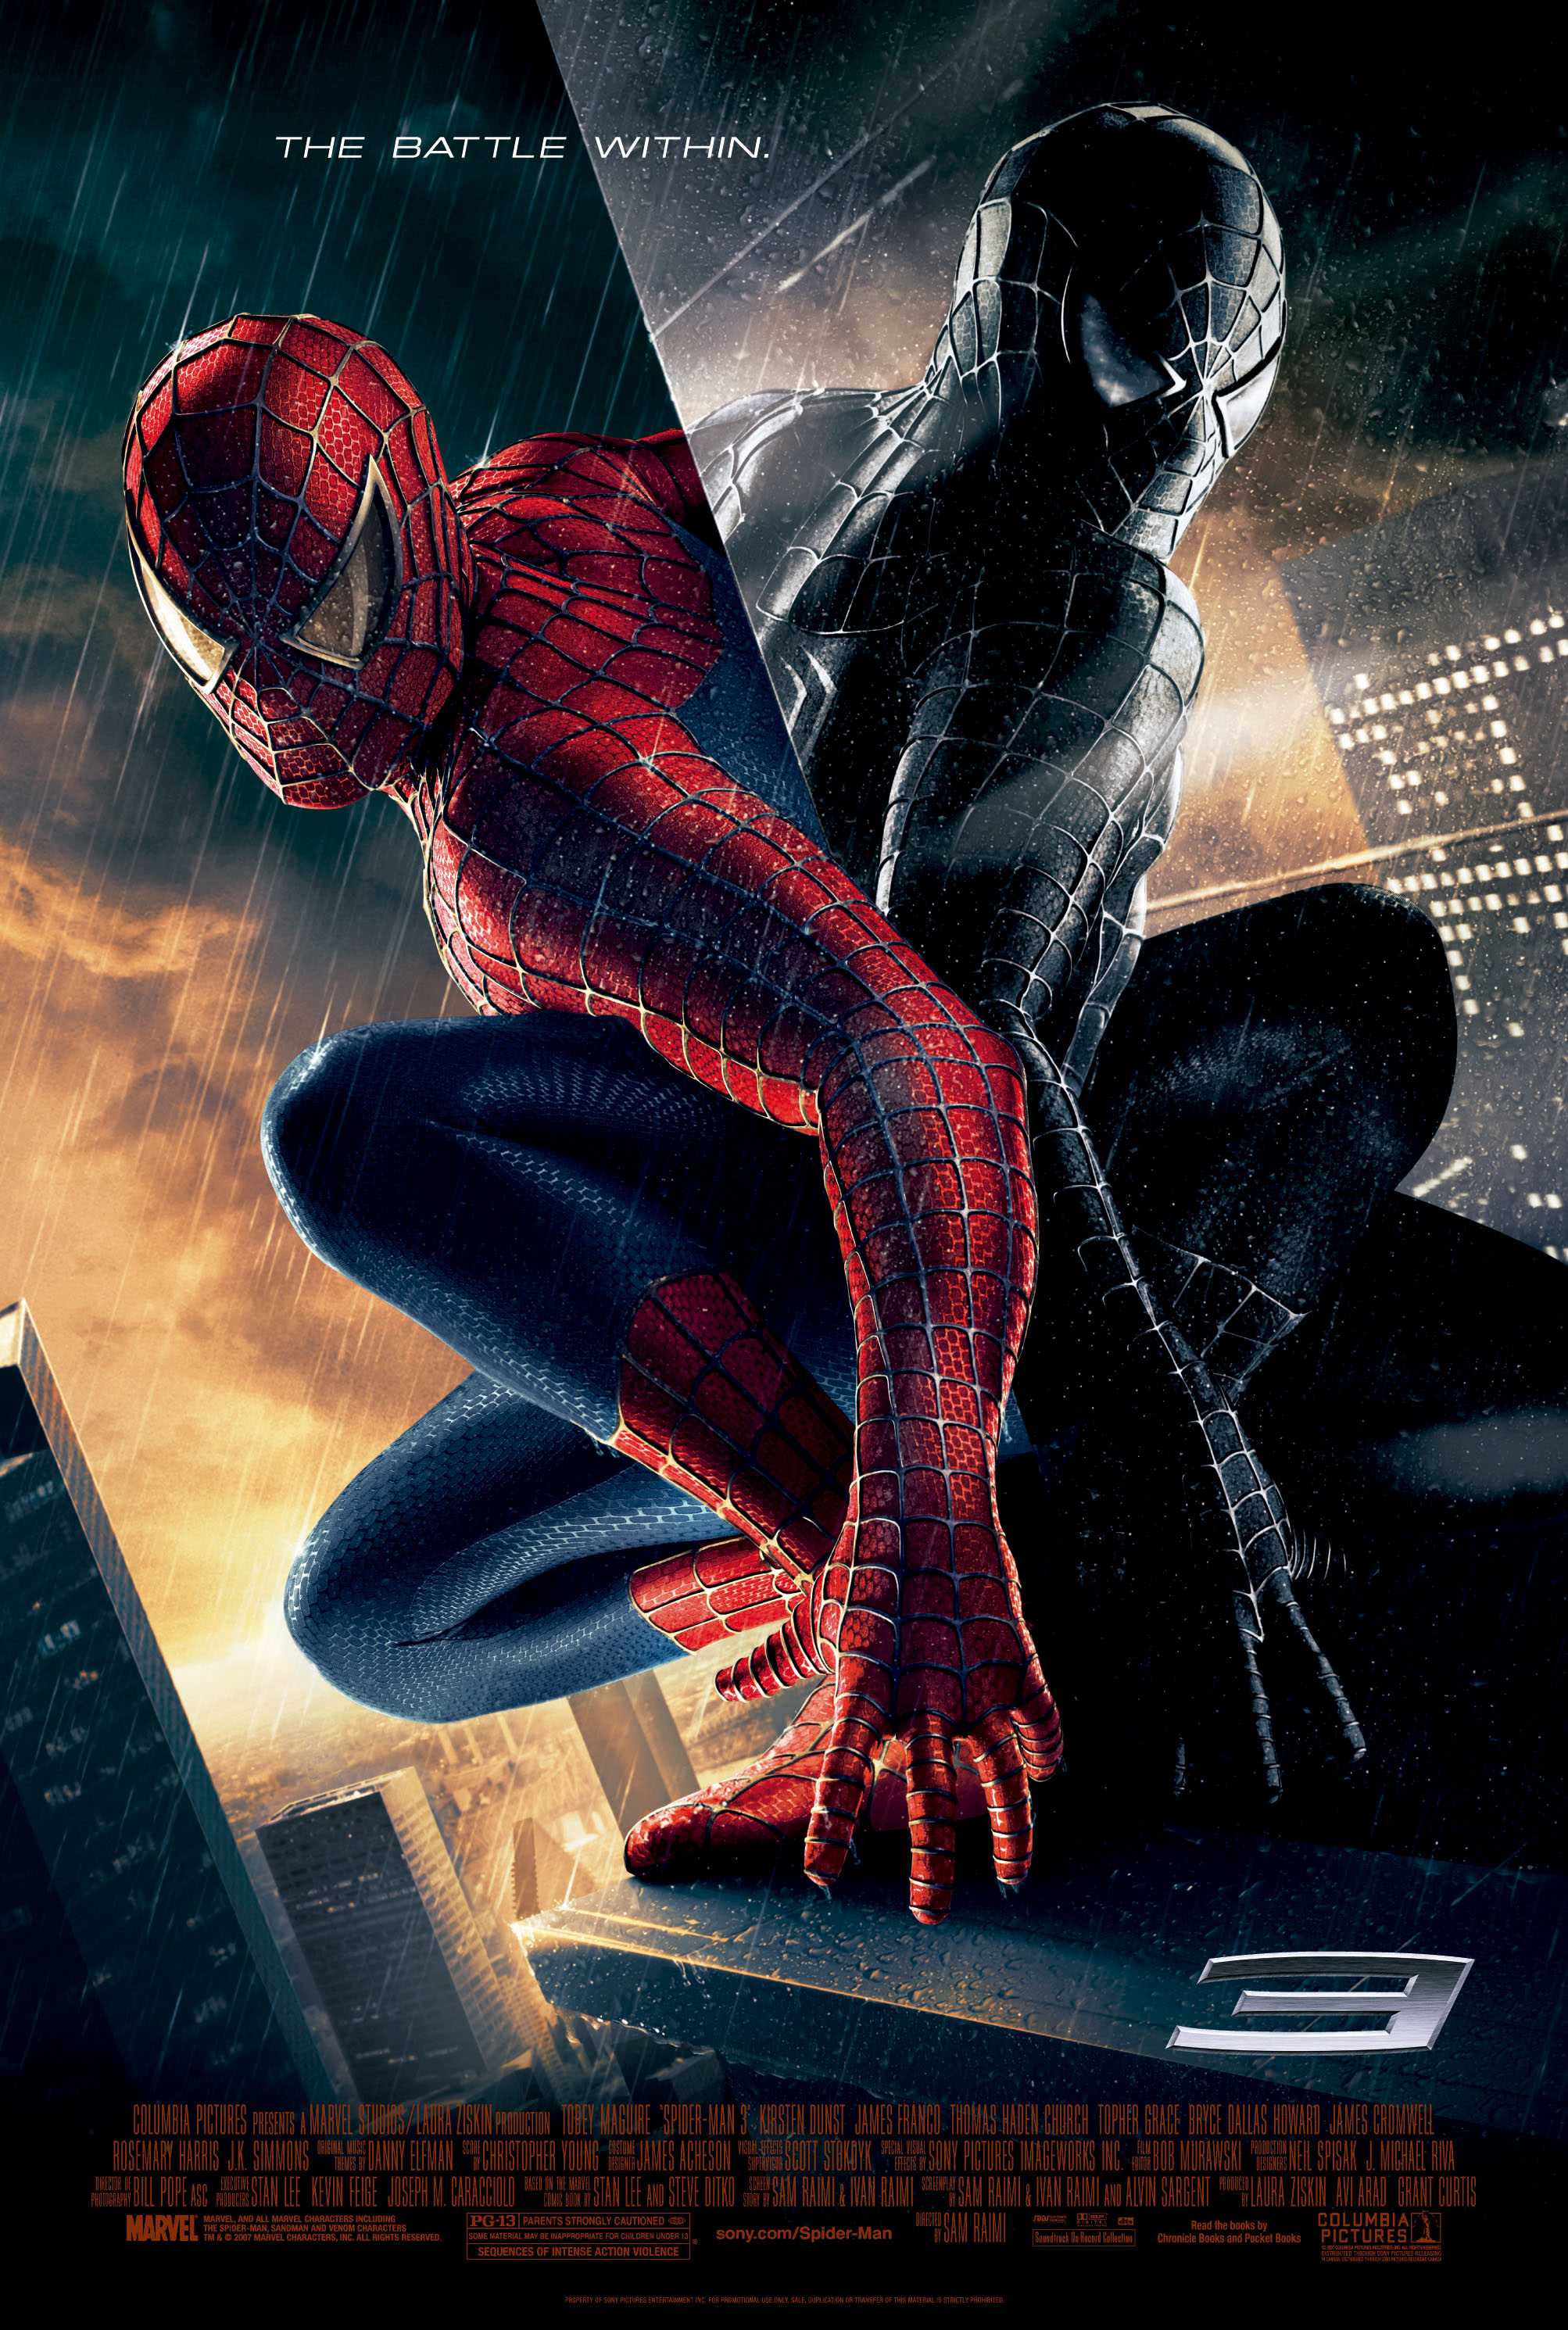 Will There Be a Marvel's Spider-Man 3?